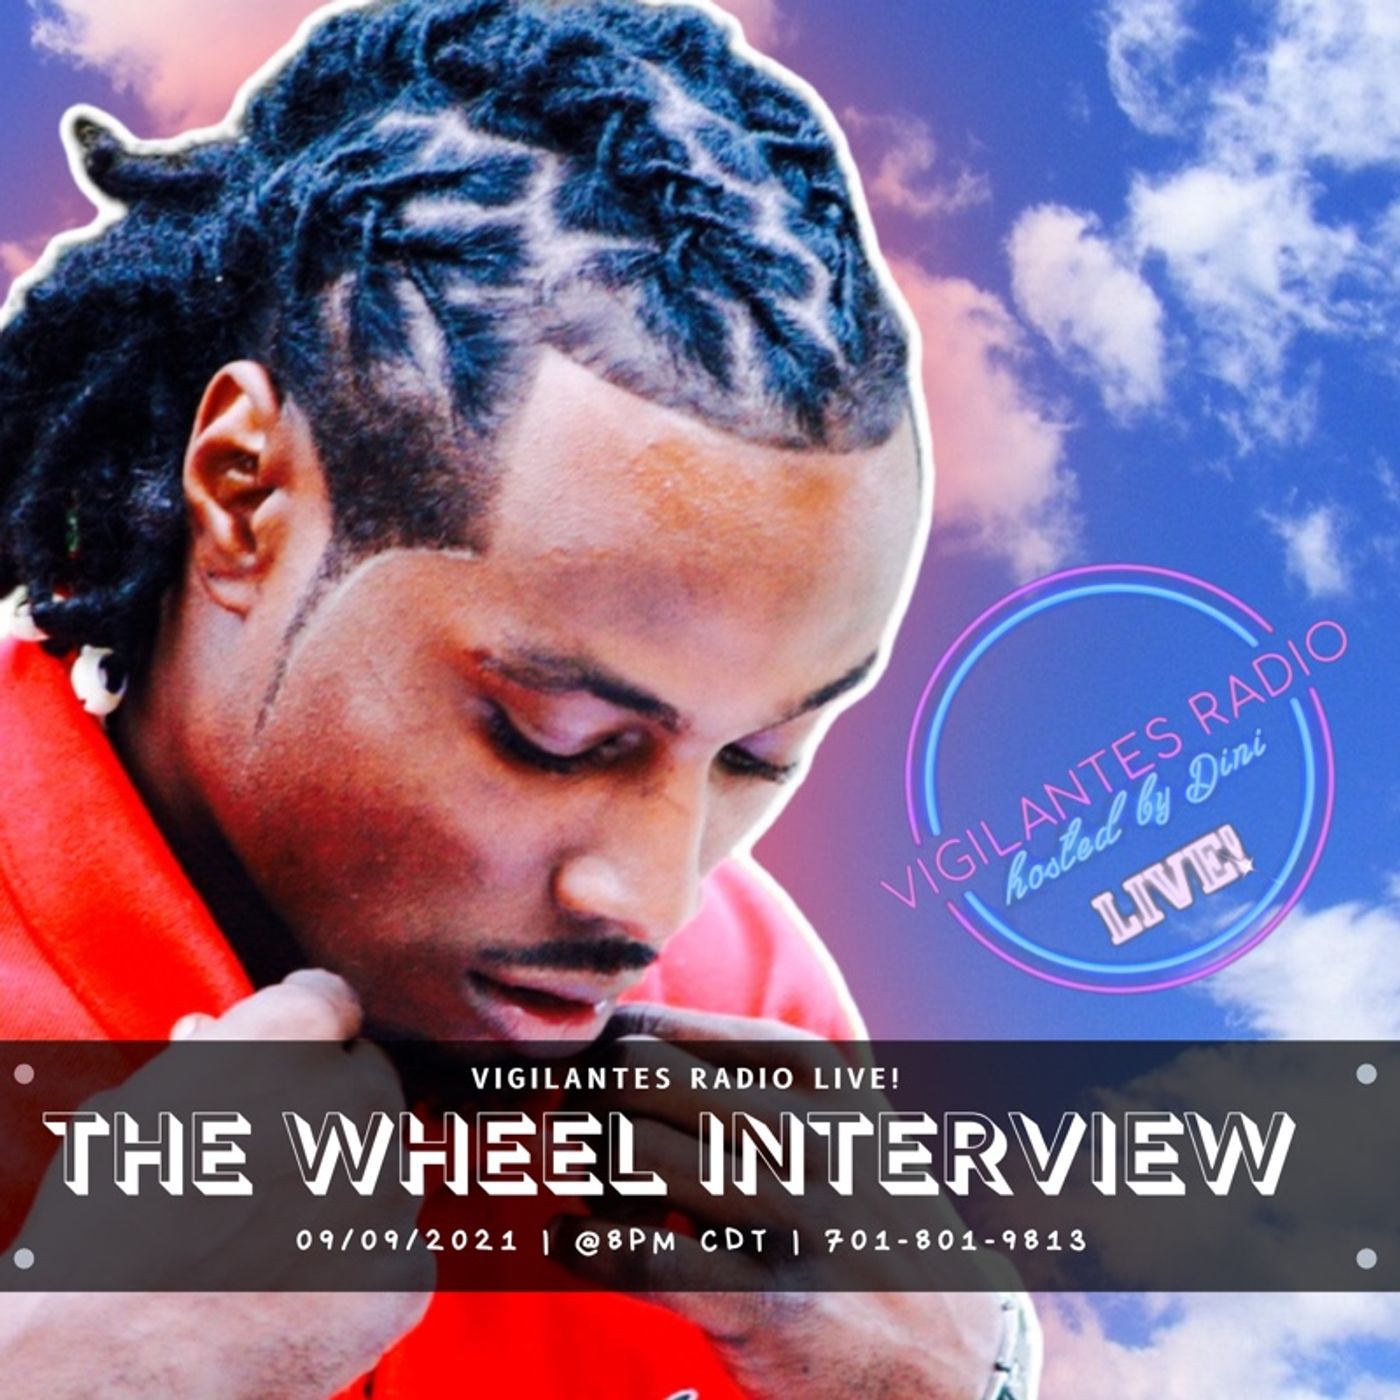 The Wheel Interview. Image